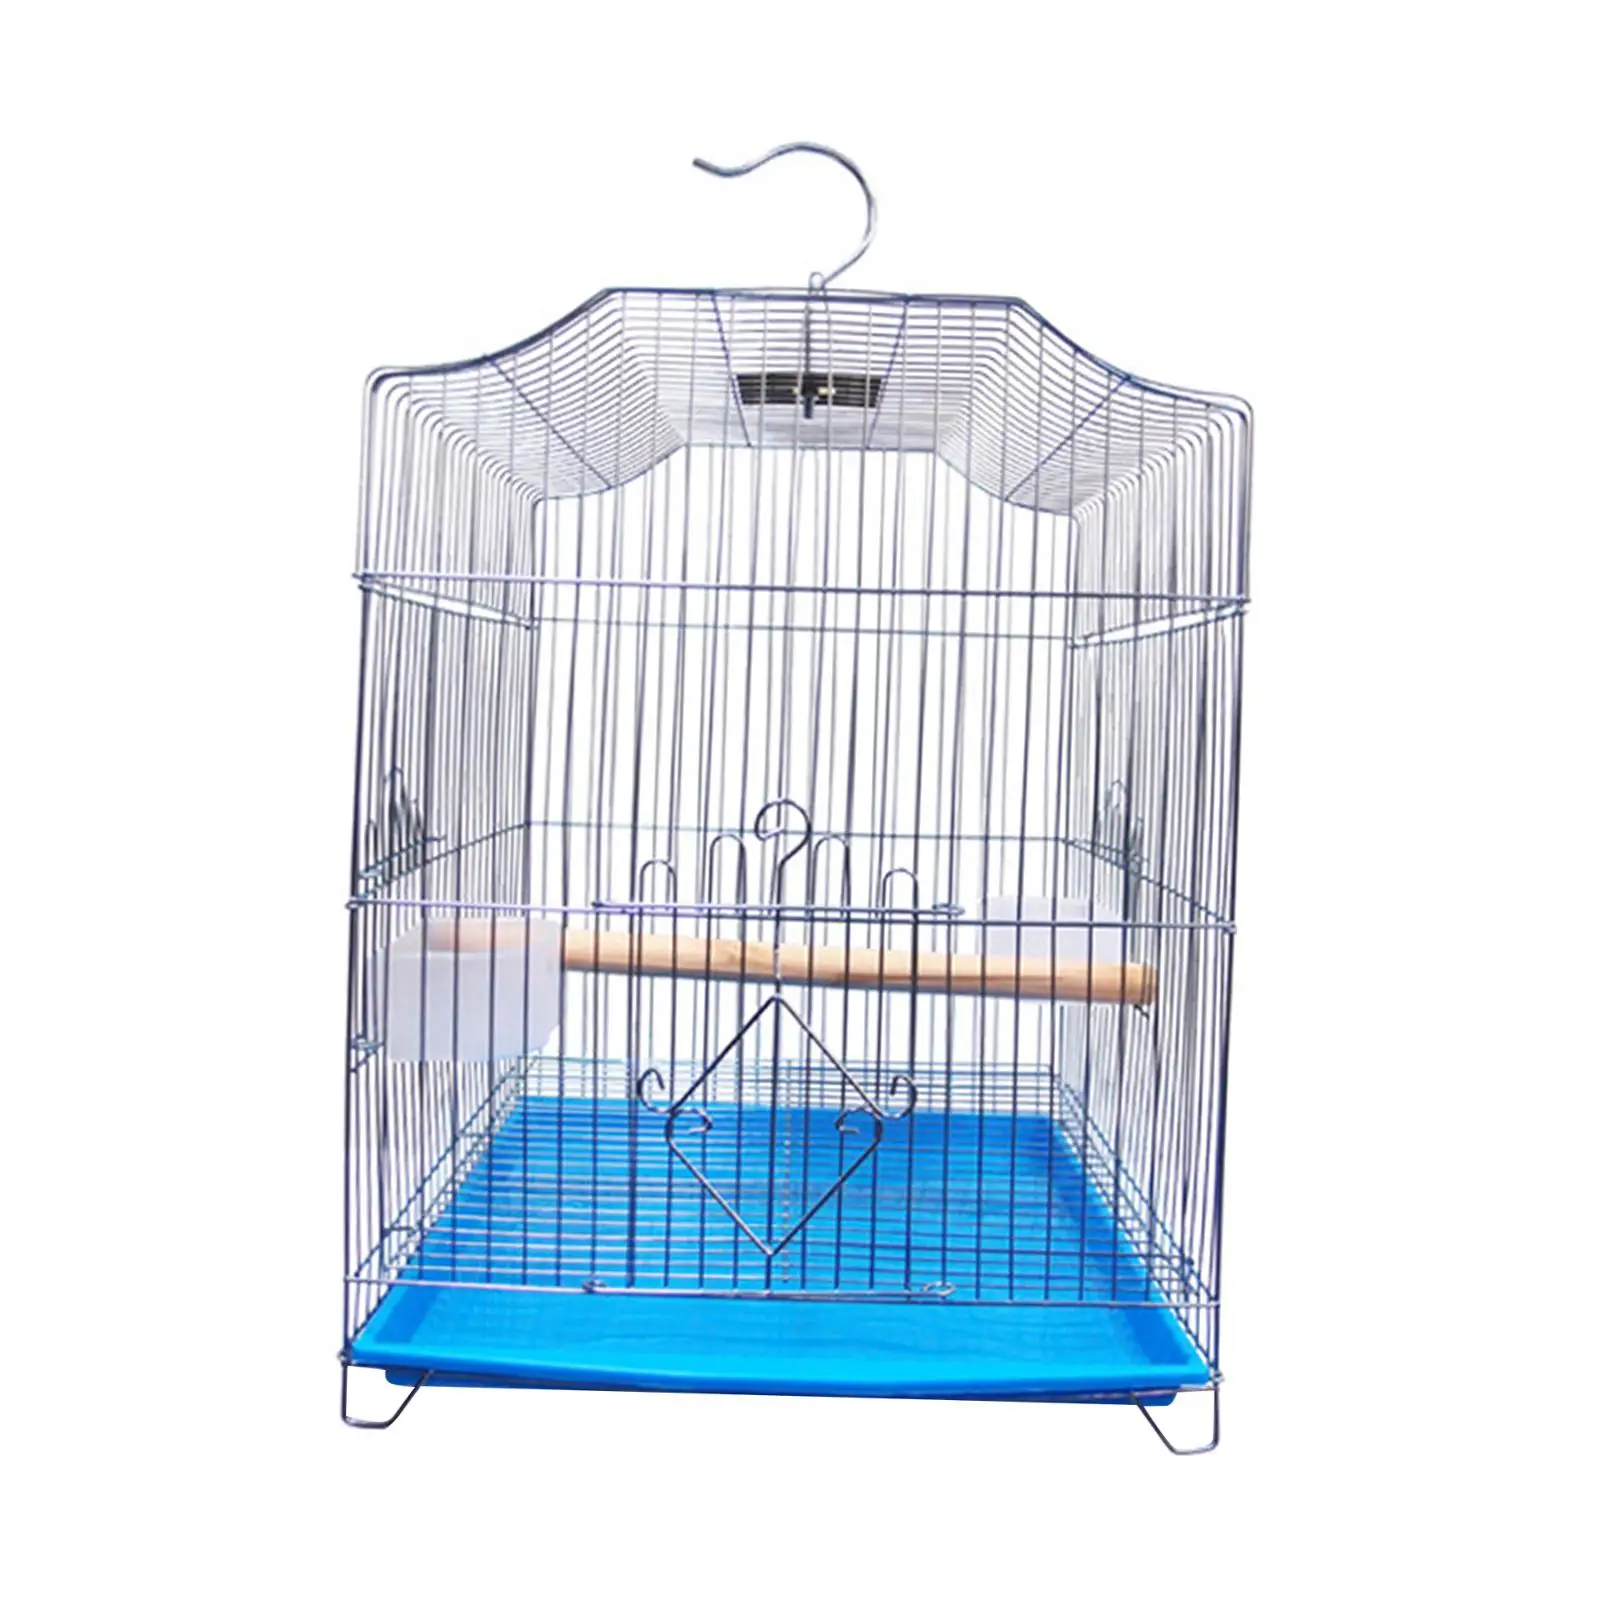 Square Birdcage Parrot Stand Cage House Supplies for Parrot Parakeet Lovebirds Cockatiel